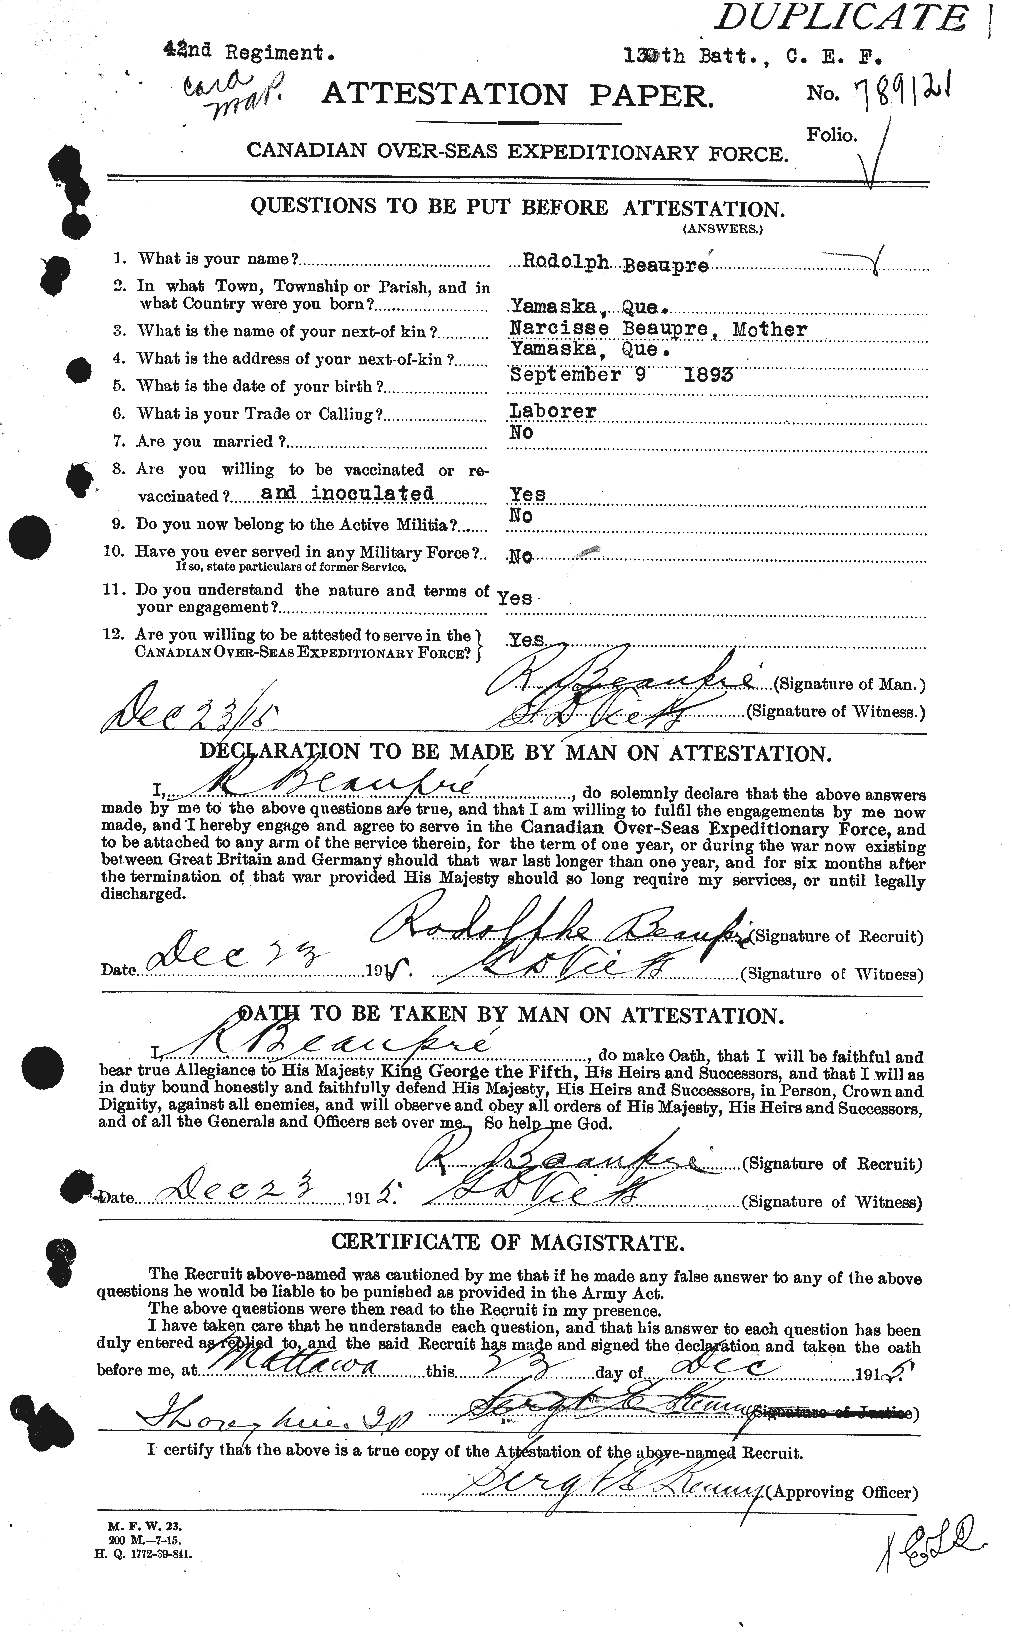 Personnel Records of the First World War - CEF 231773a